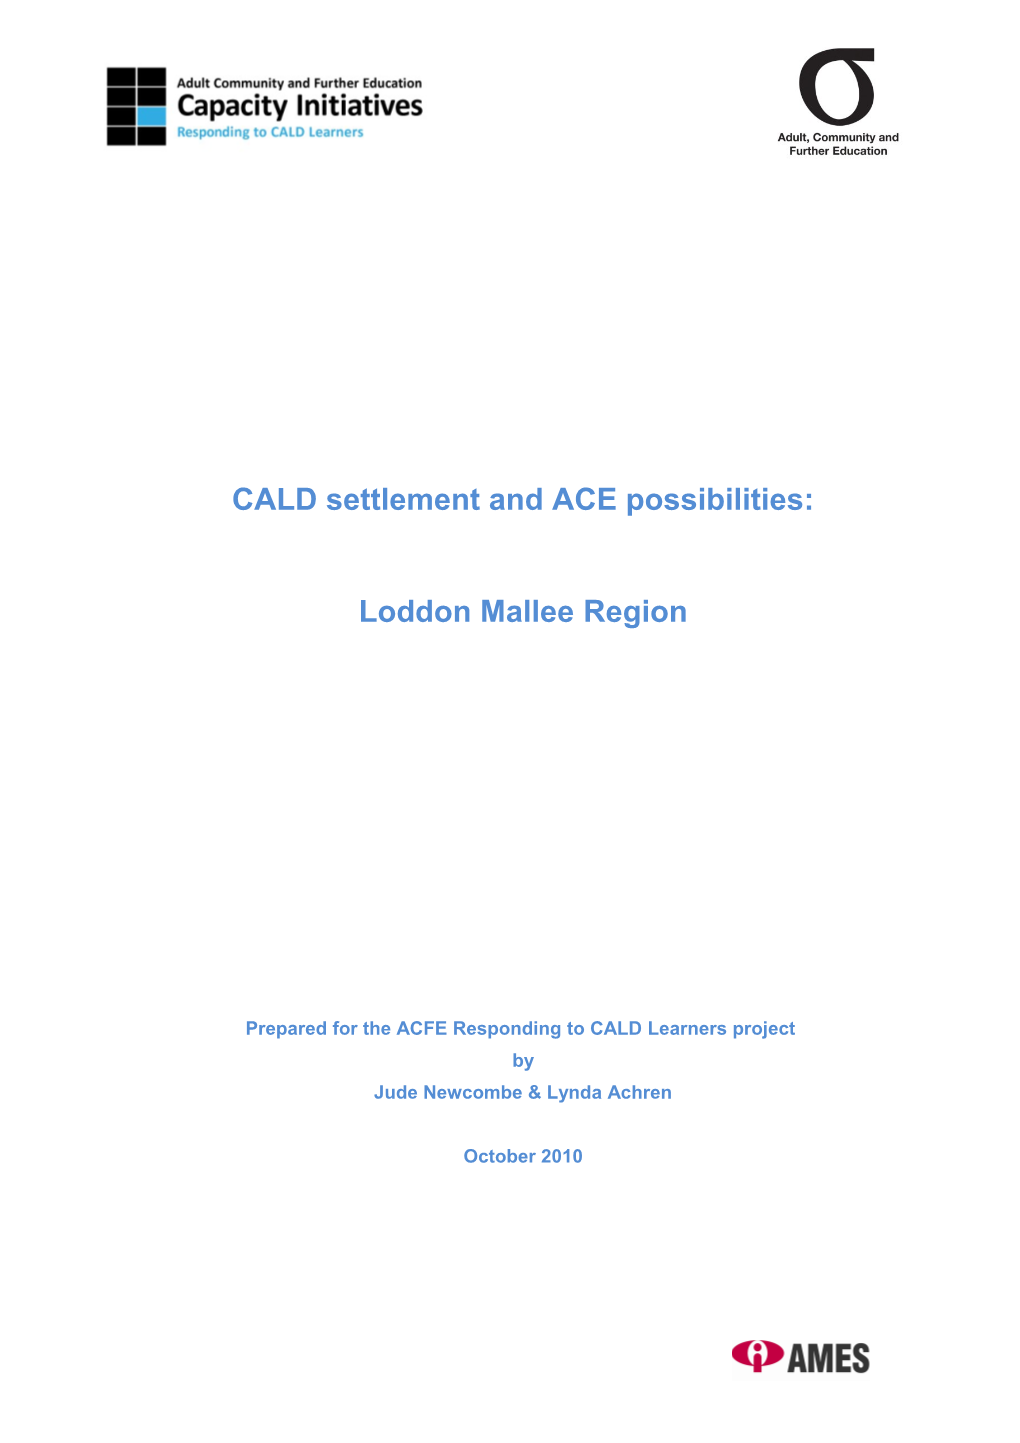 CALD Settlement and ACE Possibilities